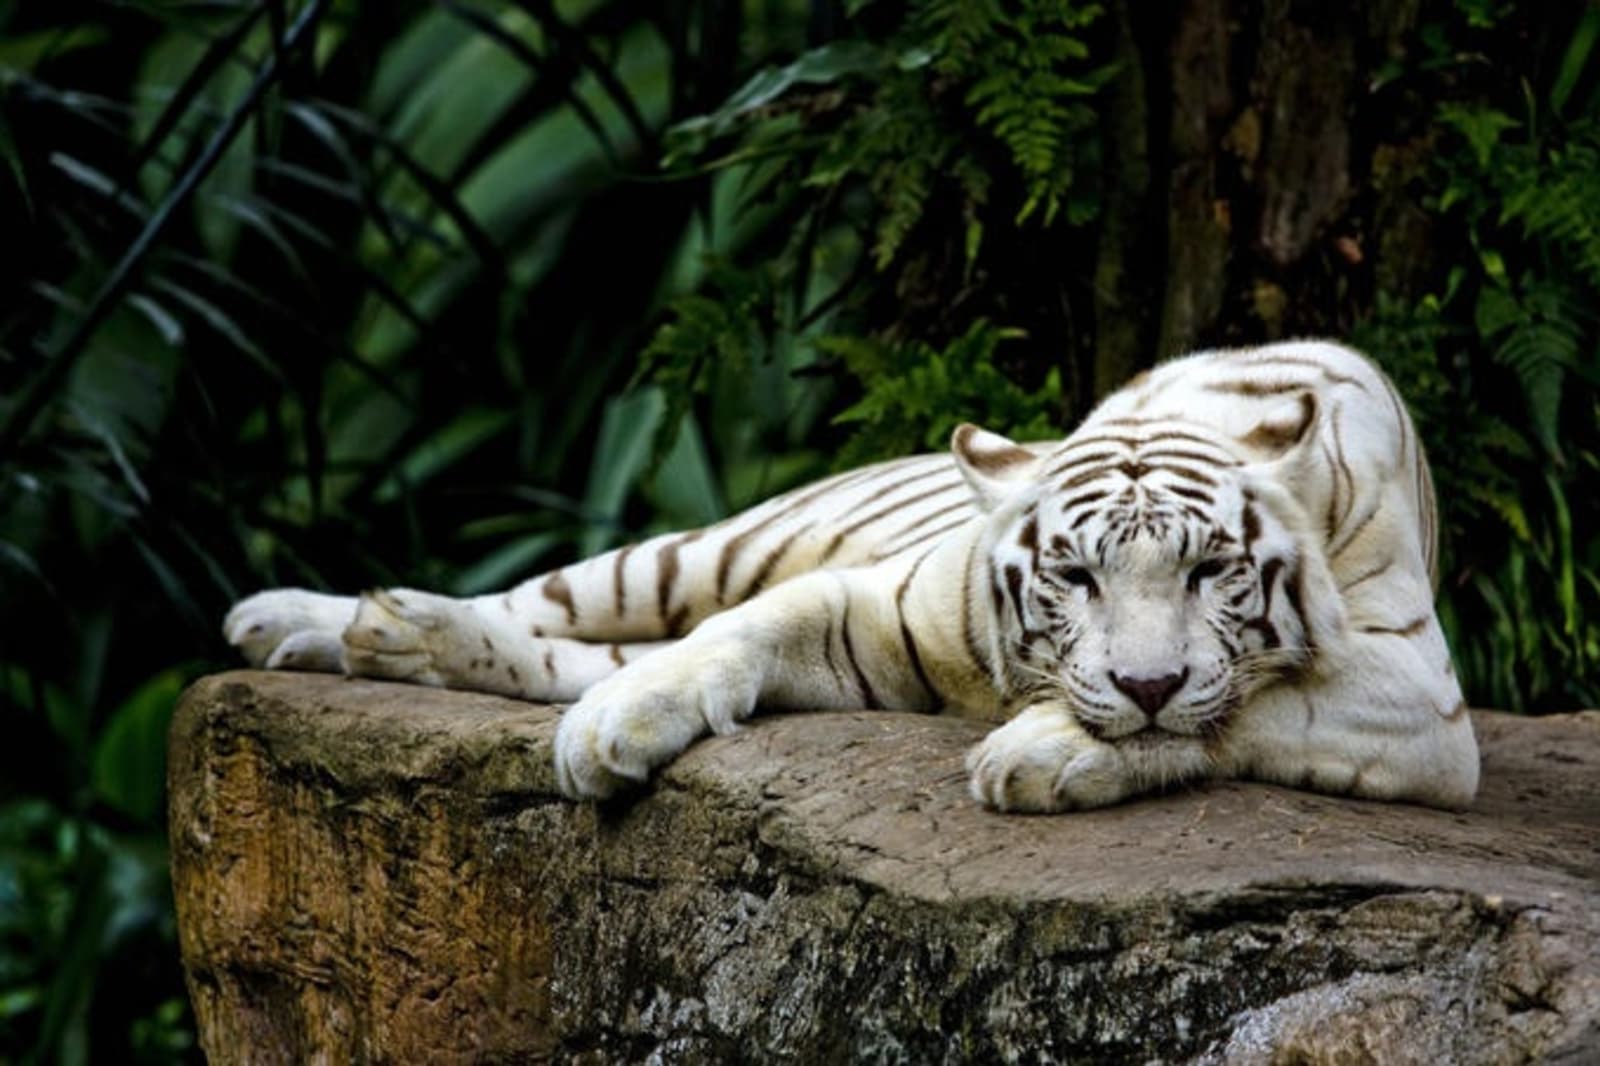 6-sg-clean-singapore-zoo-gettyimages-118825889.jpeg